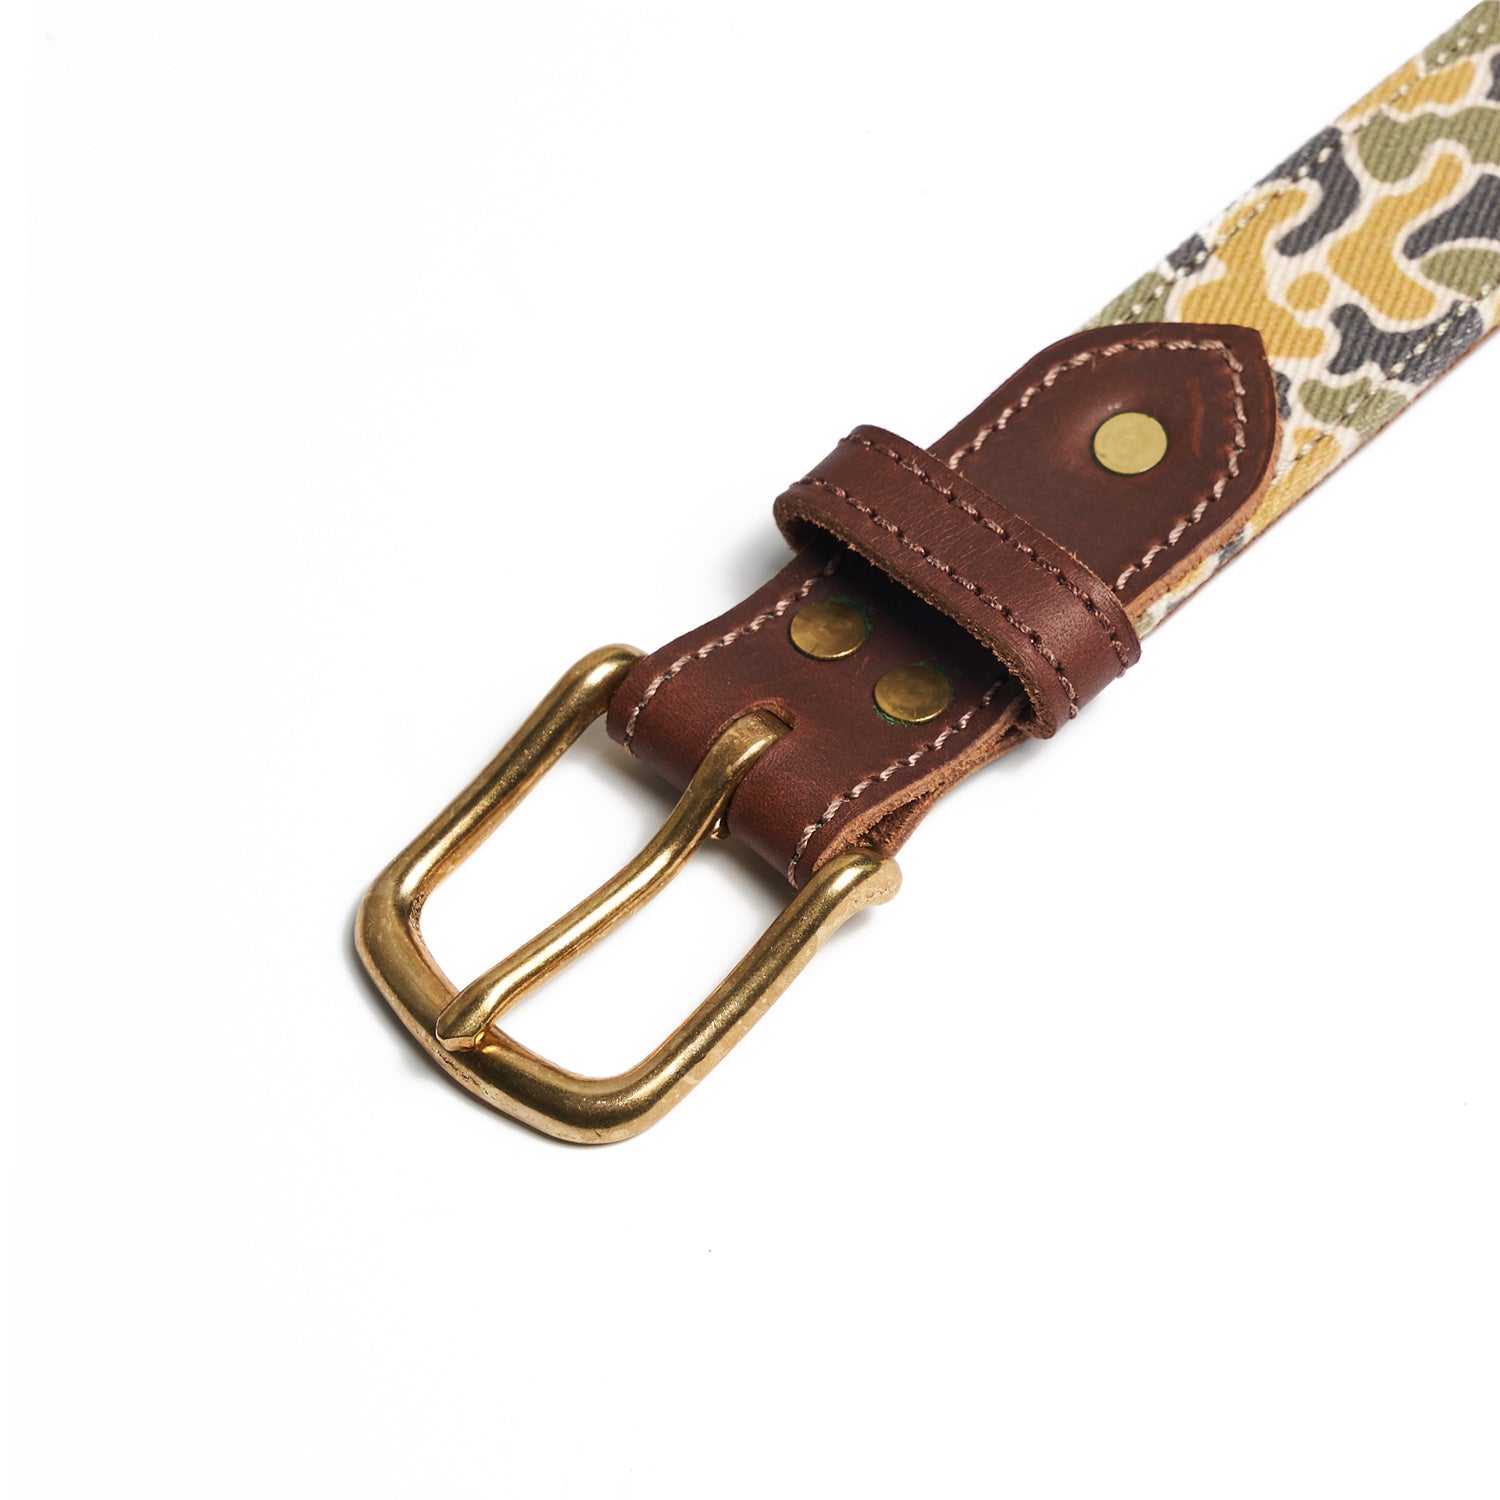 The Oxbow Canvas Belt